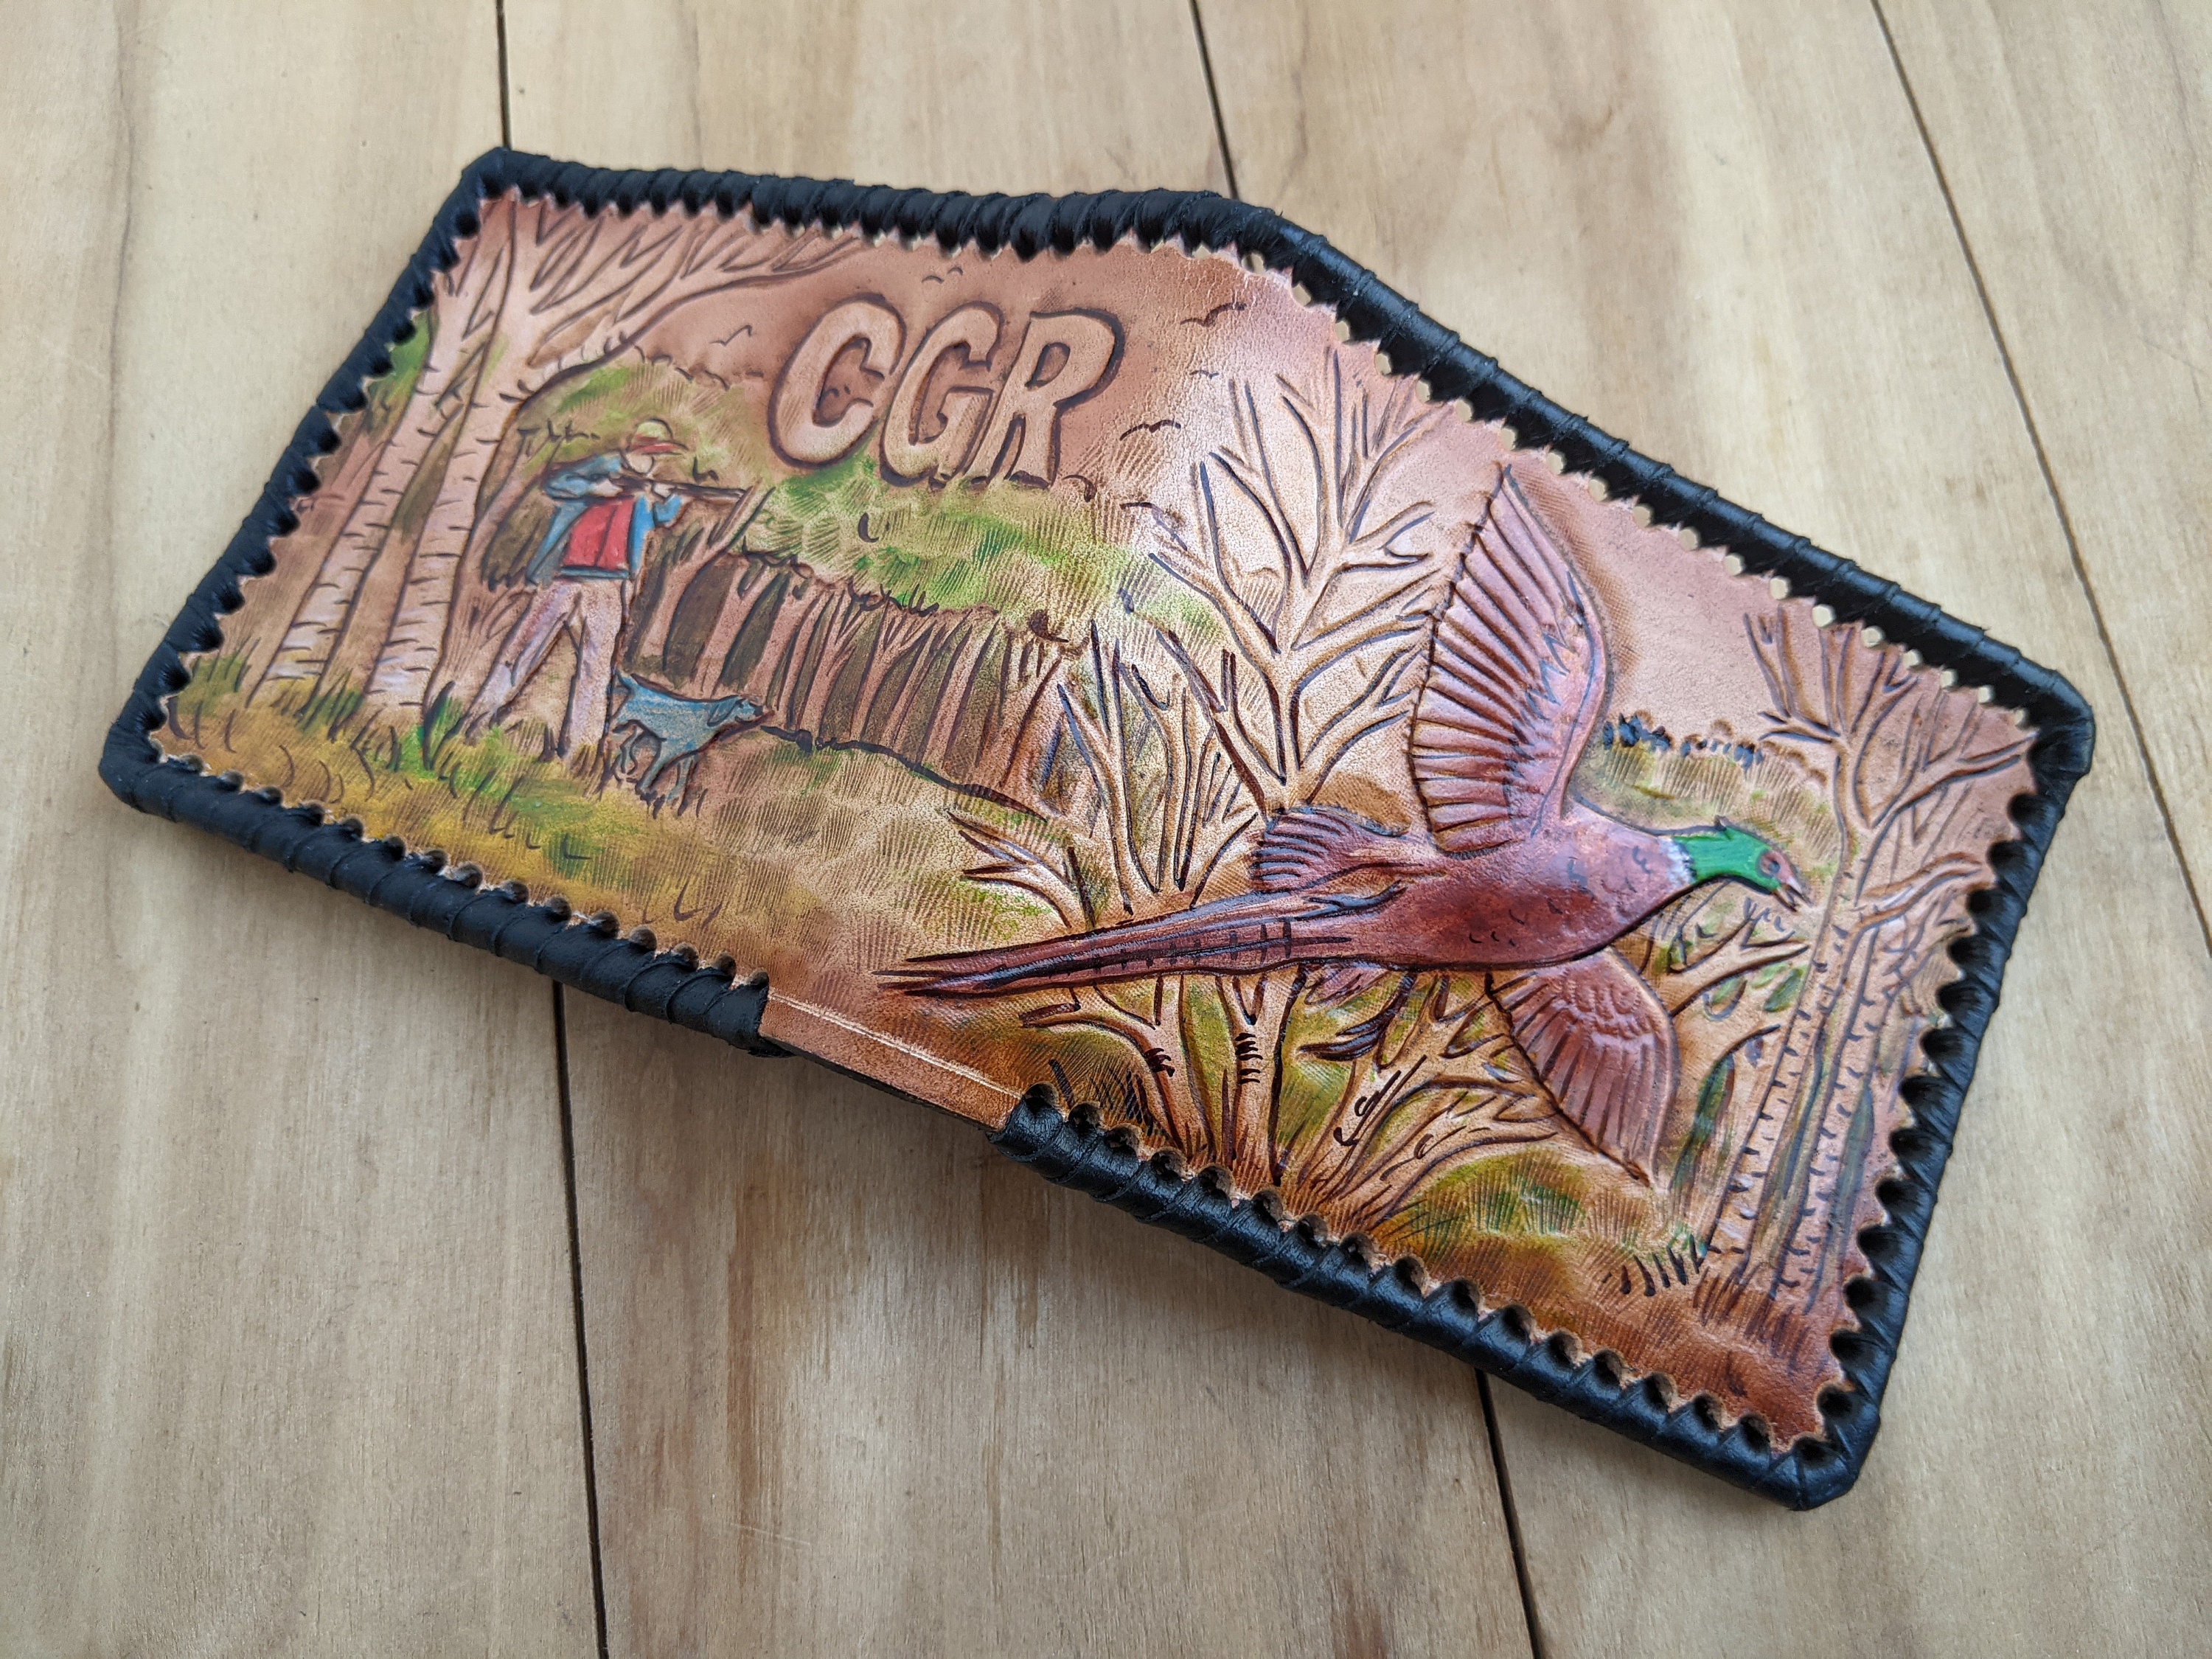 Leather wallet, 'Song of Birds'  Hand painted leather, Painting leather, Leather  wallet